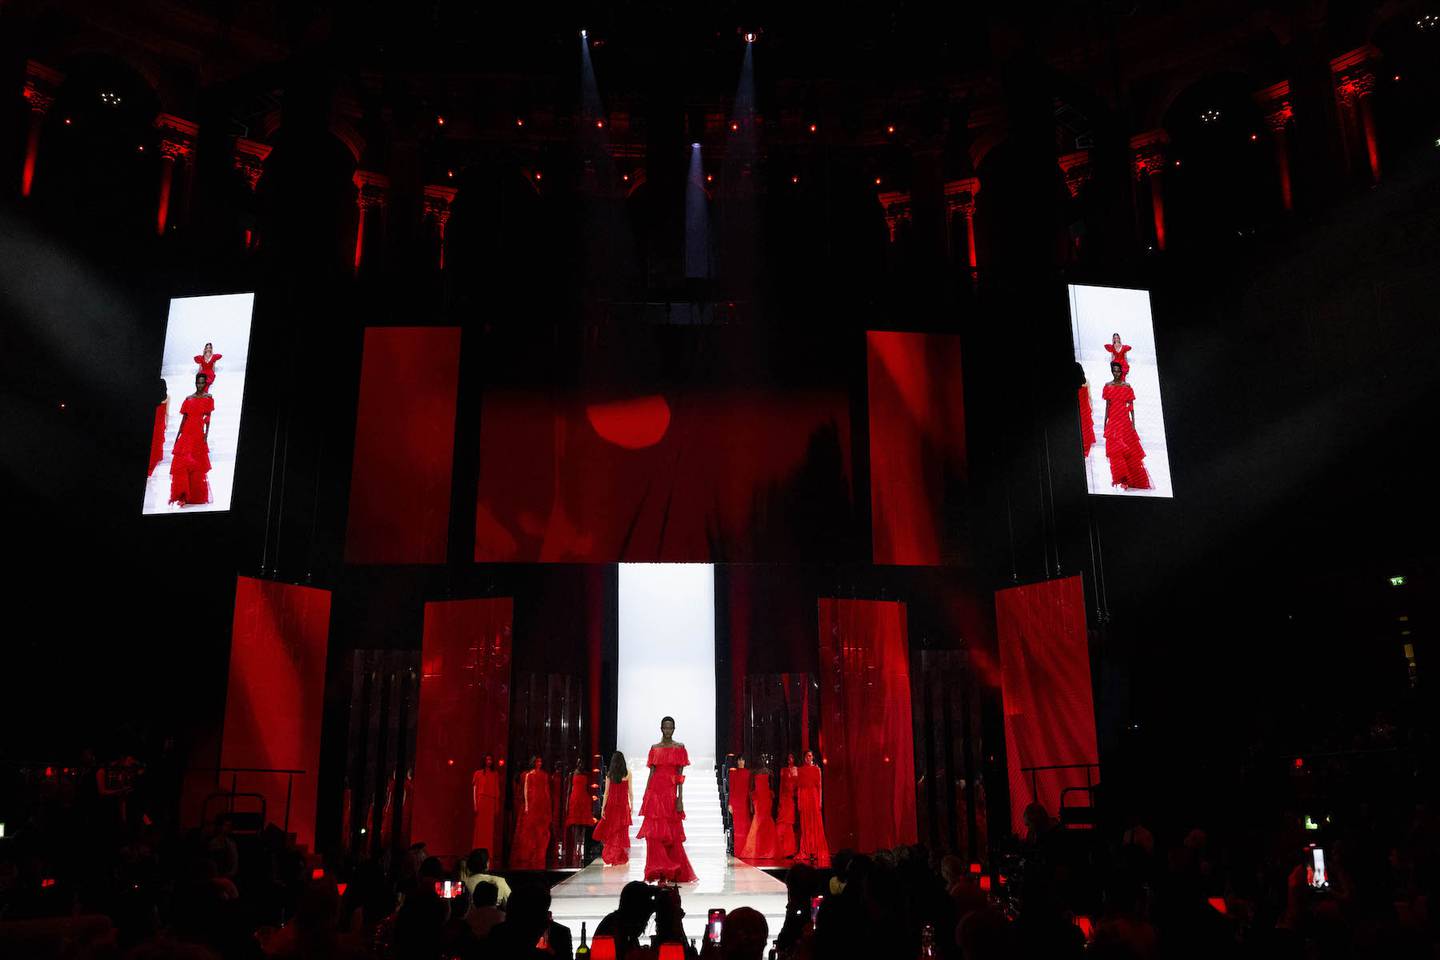 To close the ceremony, models walked the stage wearing red gowns designed by Valentino Garavani.